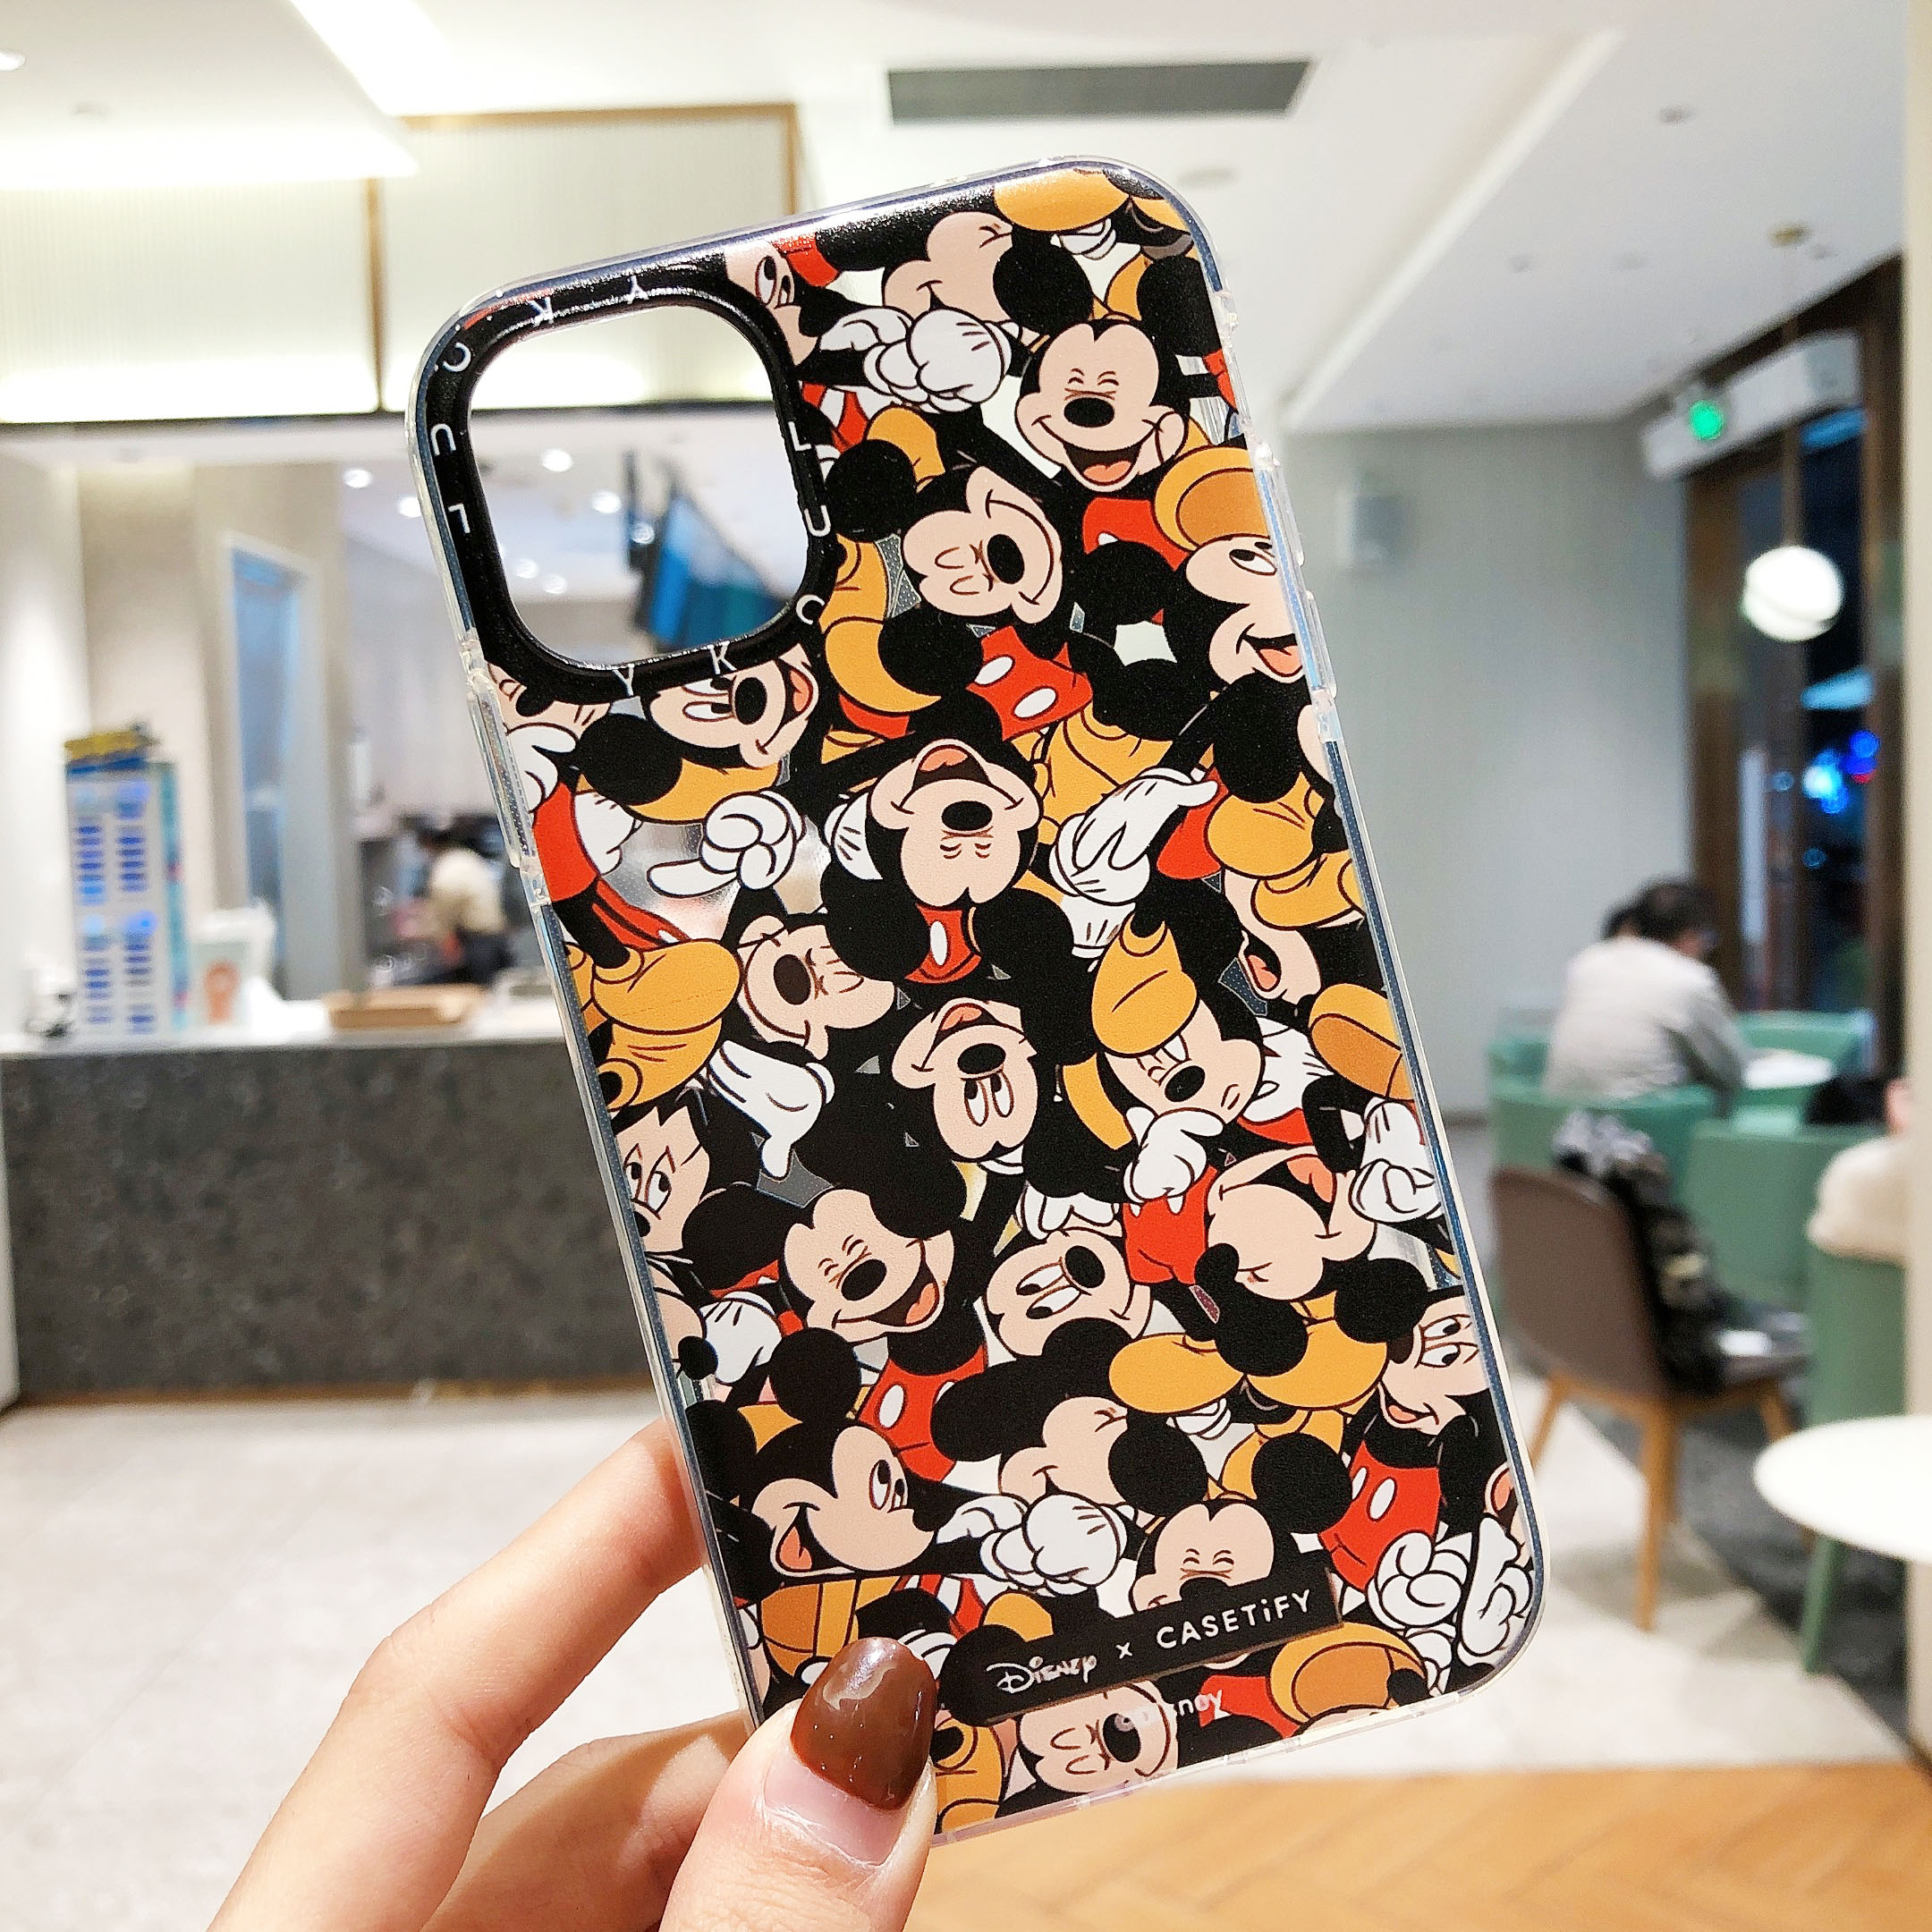 (COD) iPhone 12 11 Pro Max Xs Max XR 6s 8 7 Plus Mickey Minnie Mouse Cartoon Cellphone Case Disney Transparent Cover